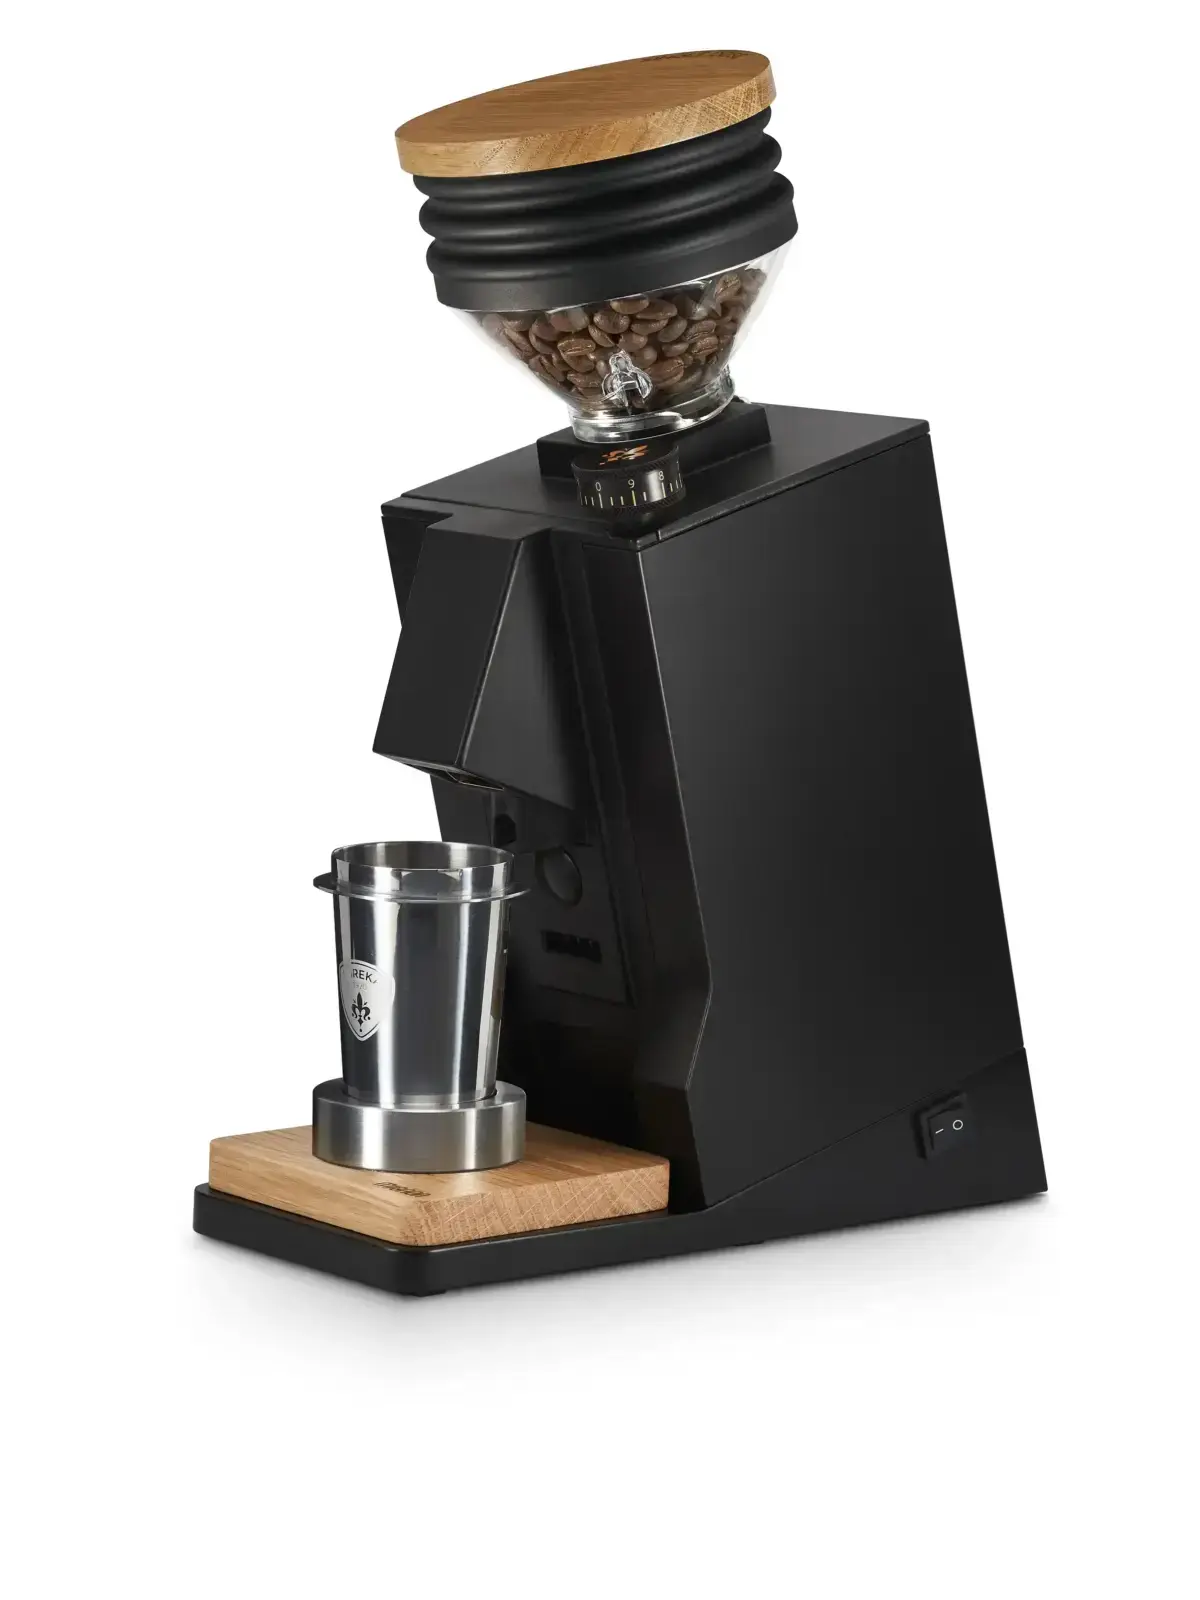 A black grinder with wood base and an unusual black and wooden top that holds beans for dosing.A silver dosing cup is set on a wooden plate at the bottom.